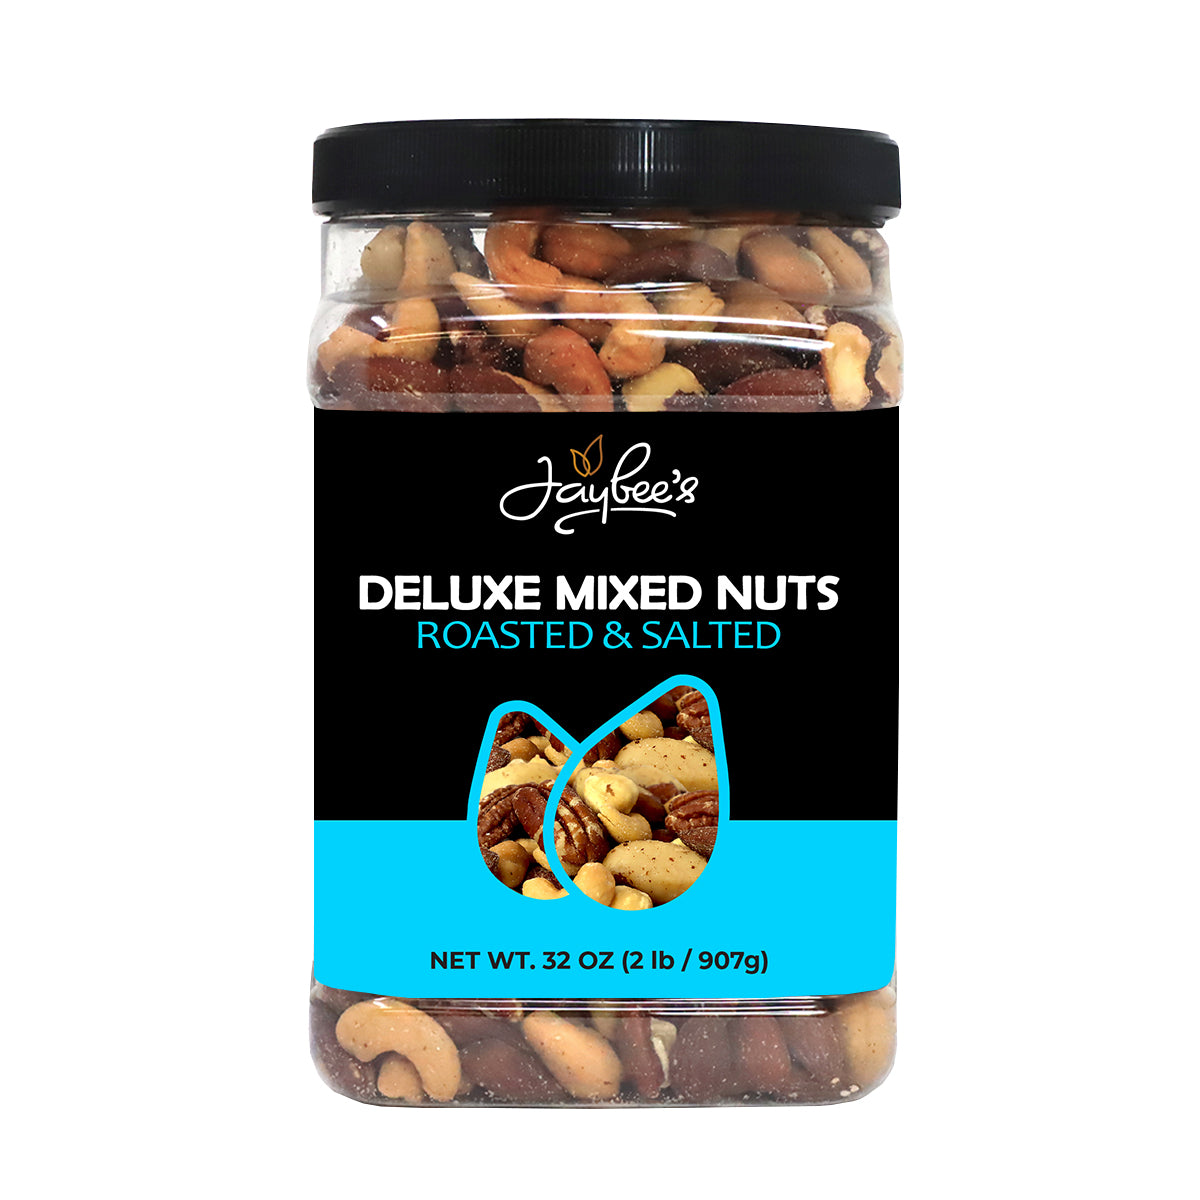 Deluxe Mixed Nuts - Roasted & Salted